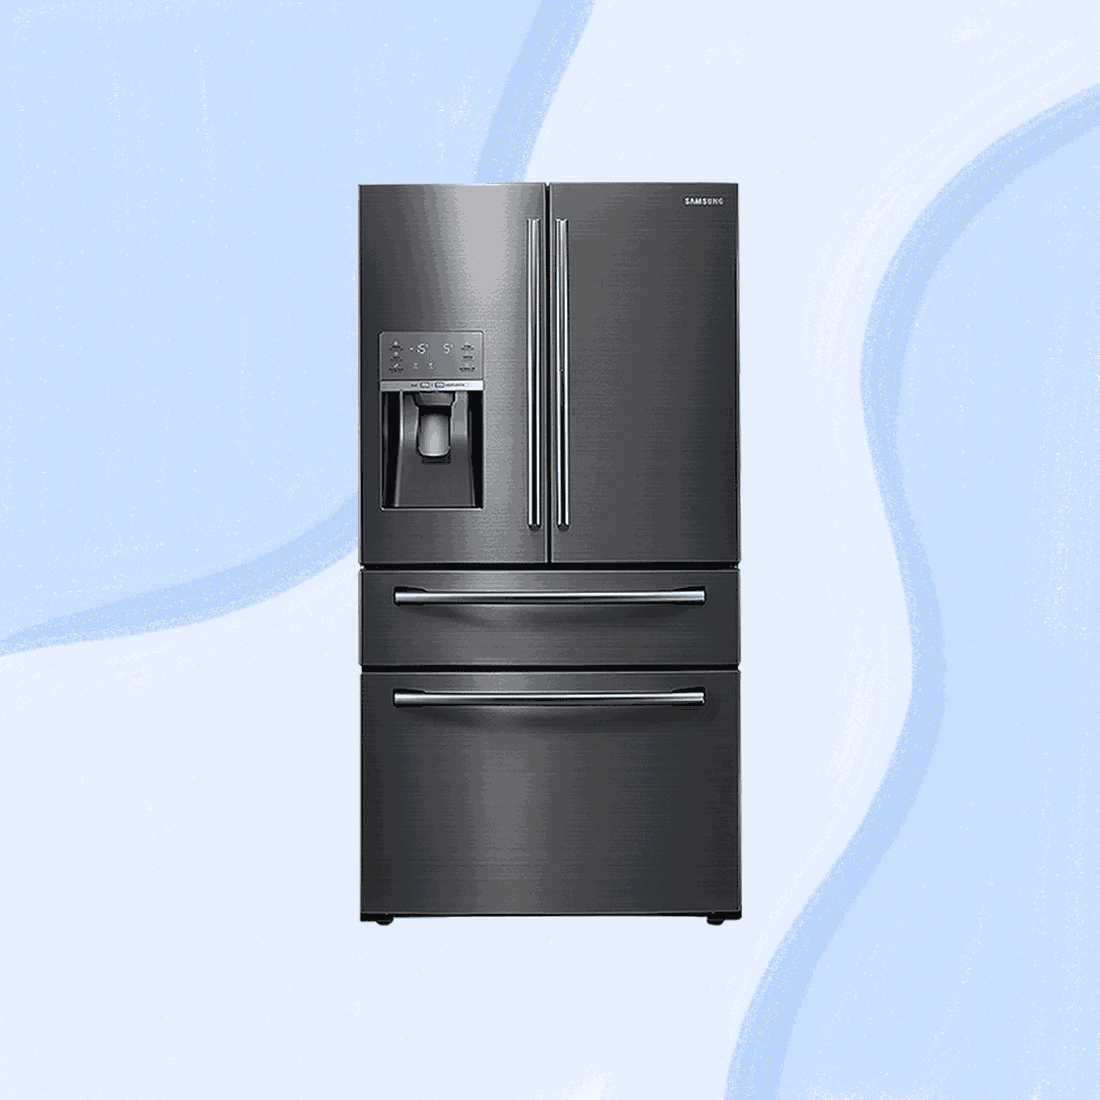 The Best Refrigerators for *All* of Your Kitchen Needs